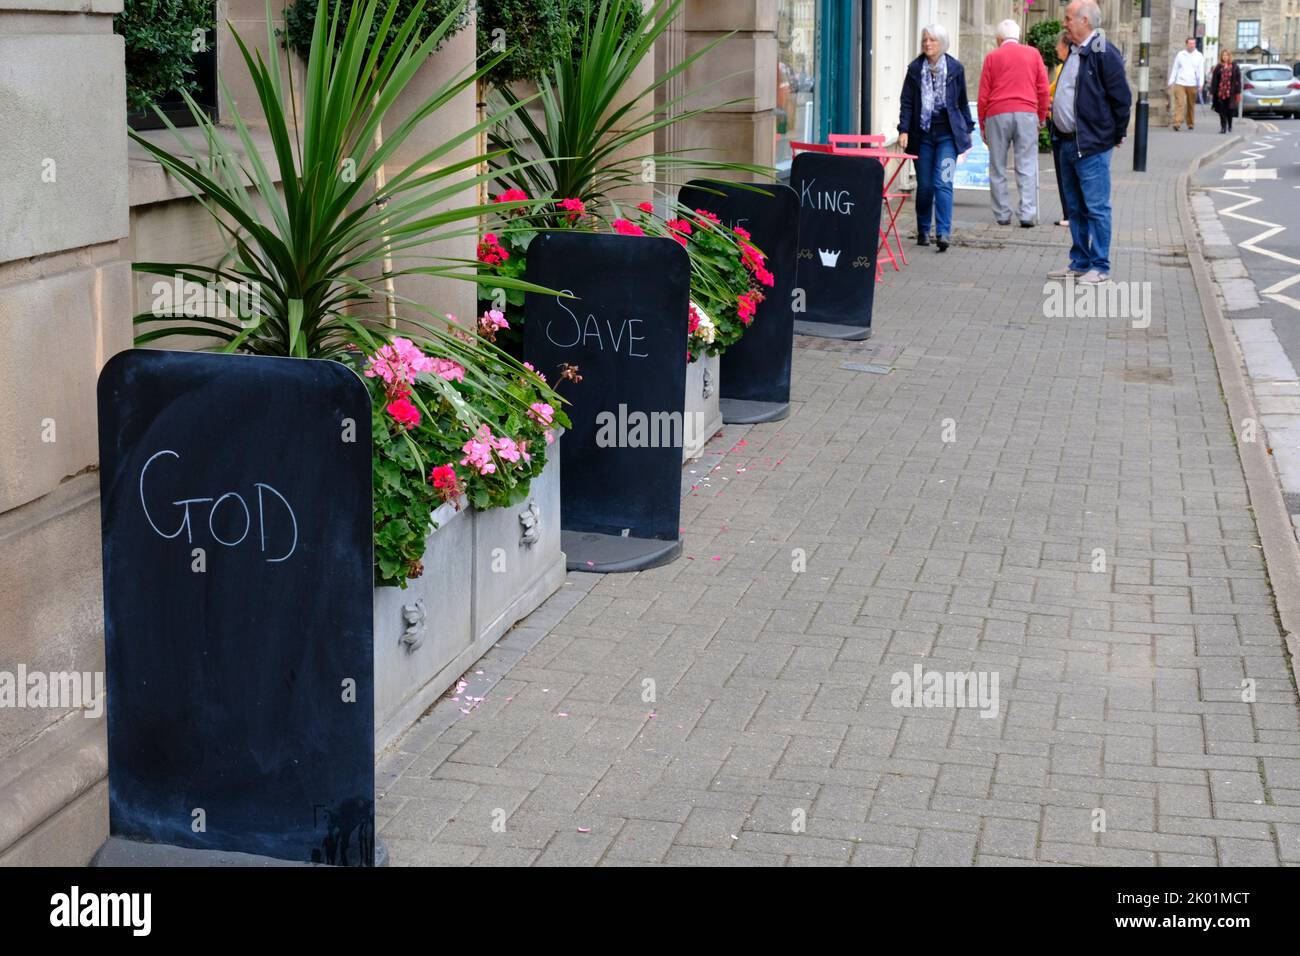 Tetbury, UK. 9th Sep, 2022. Flags are lowered in this small Cotswold town. King Charles III, owns a country home at nearby Highgrove. God save the King signs. Credit: JMF News/Alamy Live News Stock Photo